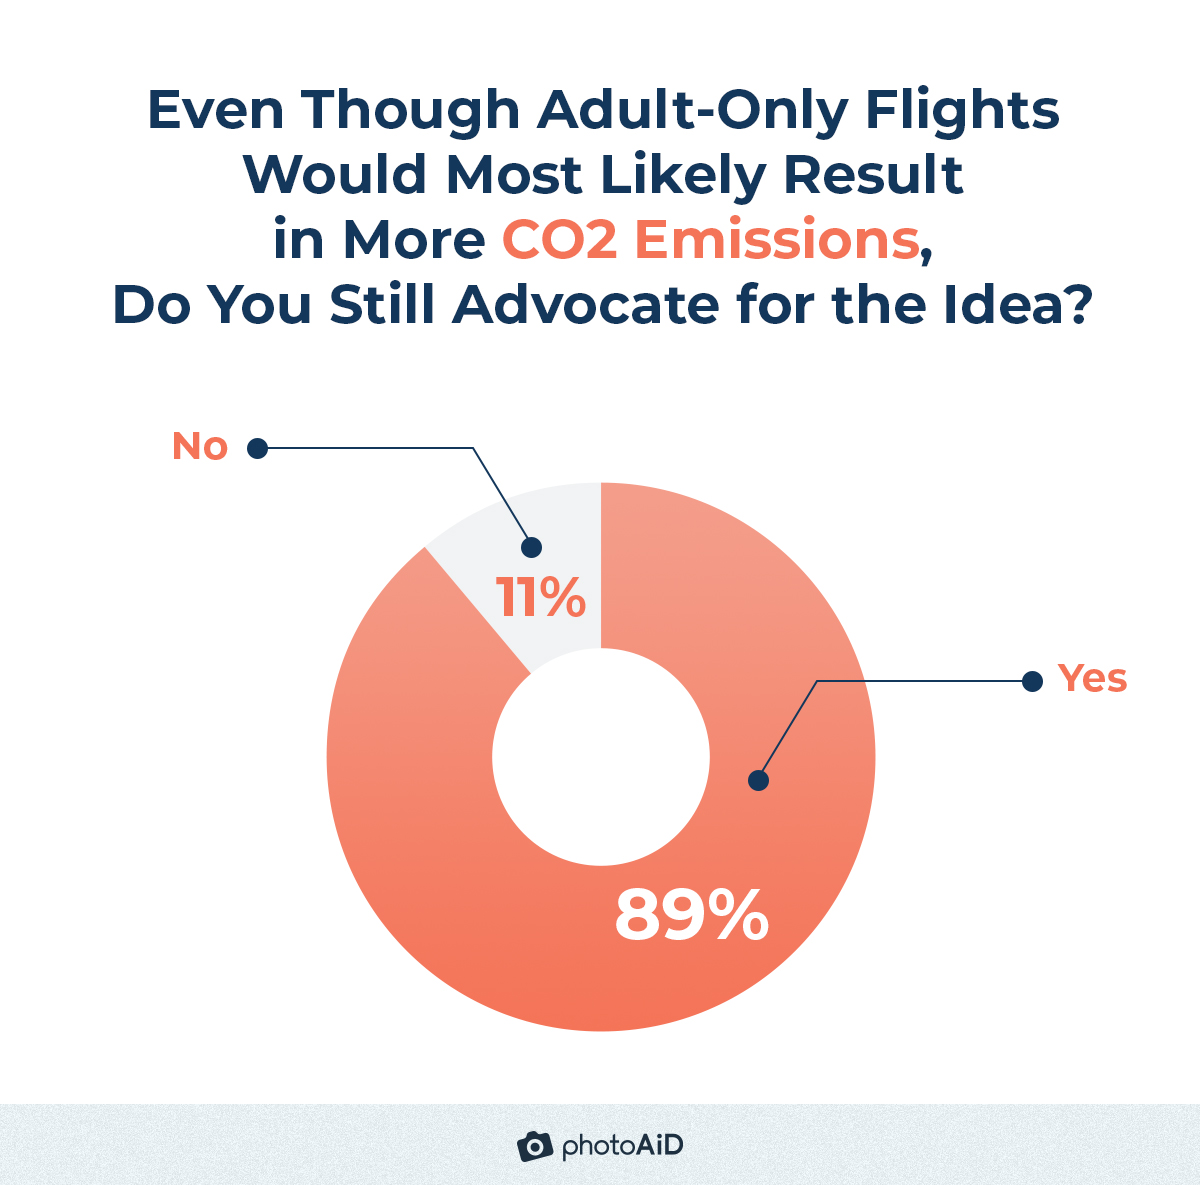 89% of Americans still advocate for kid-free flights, even after realizing it’d lead to more CO2 emissions